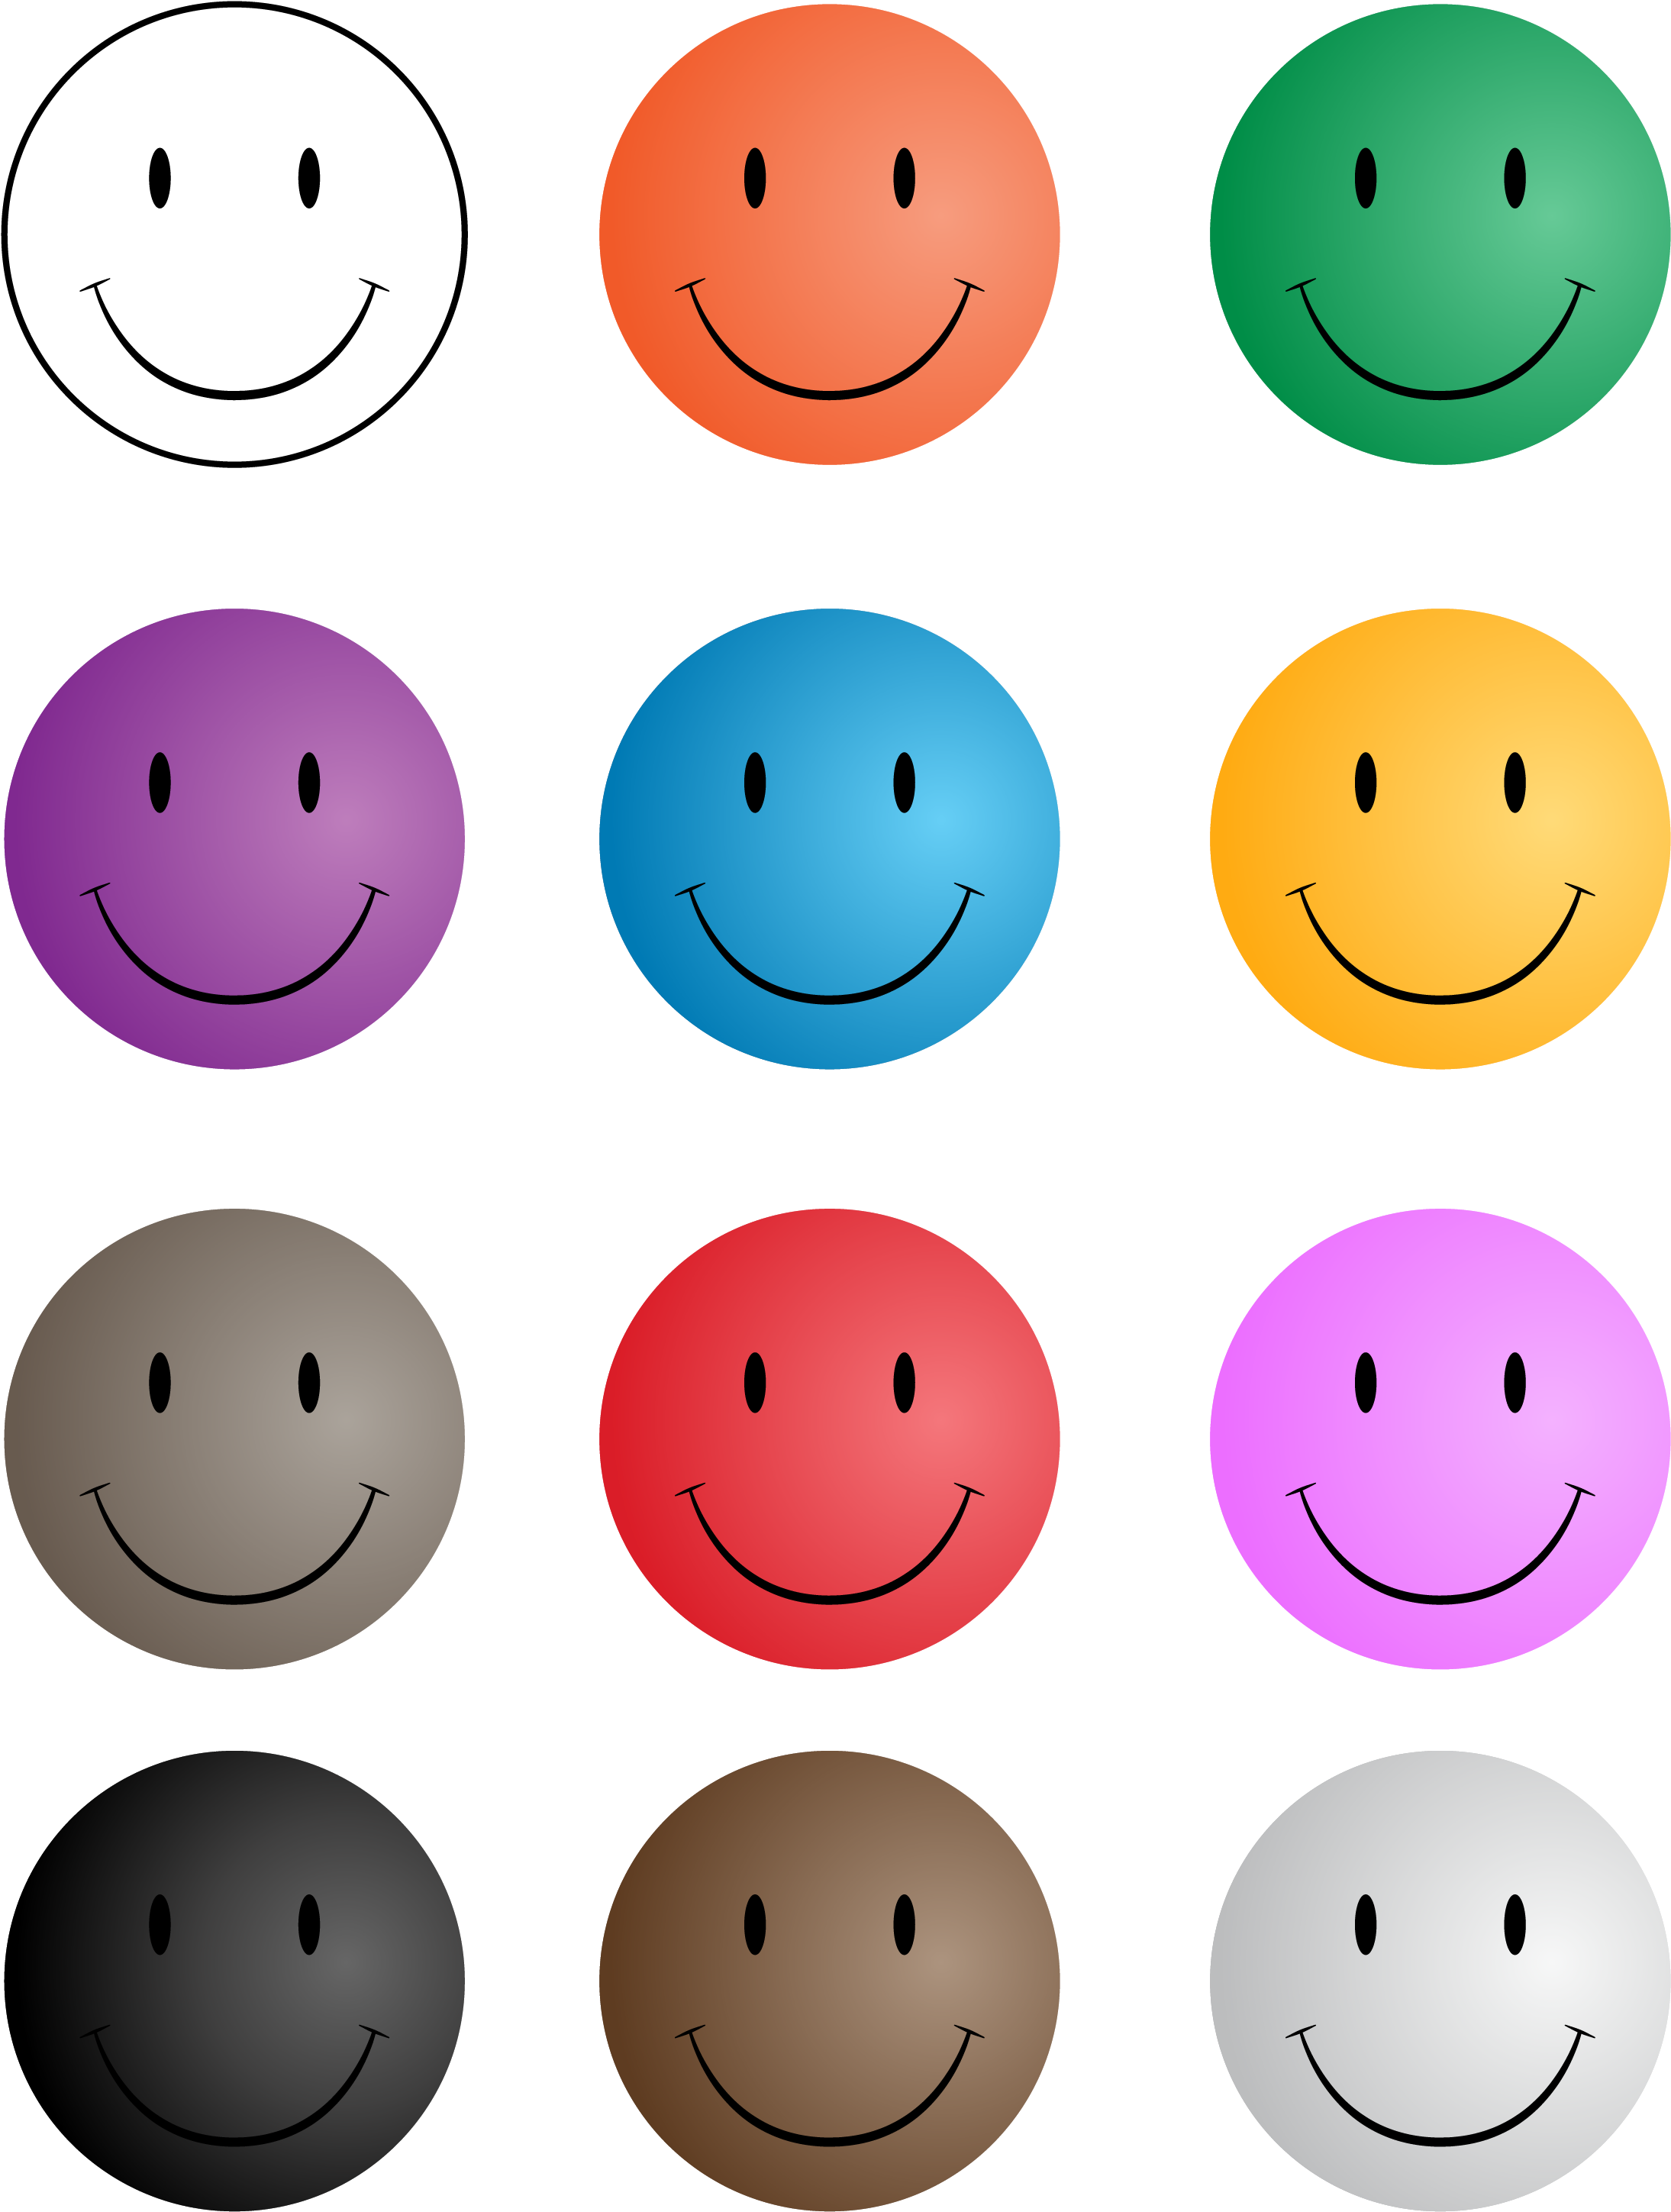 Colorful Smiley Faces Array